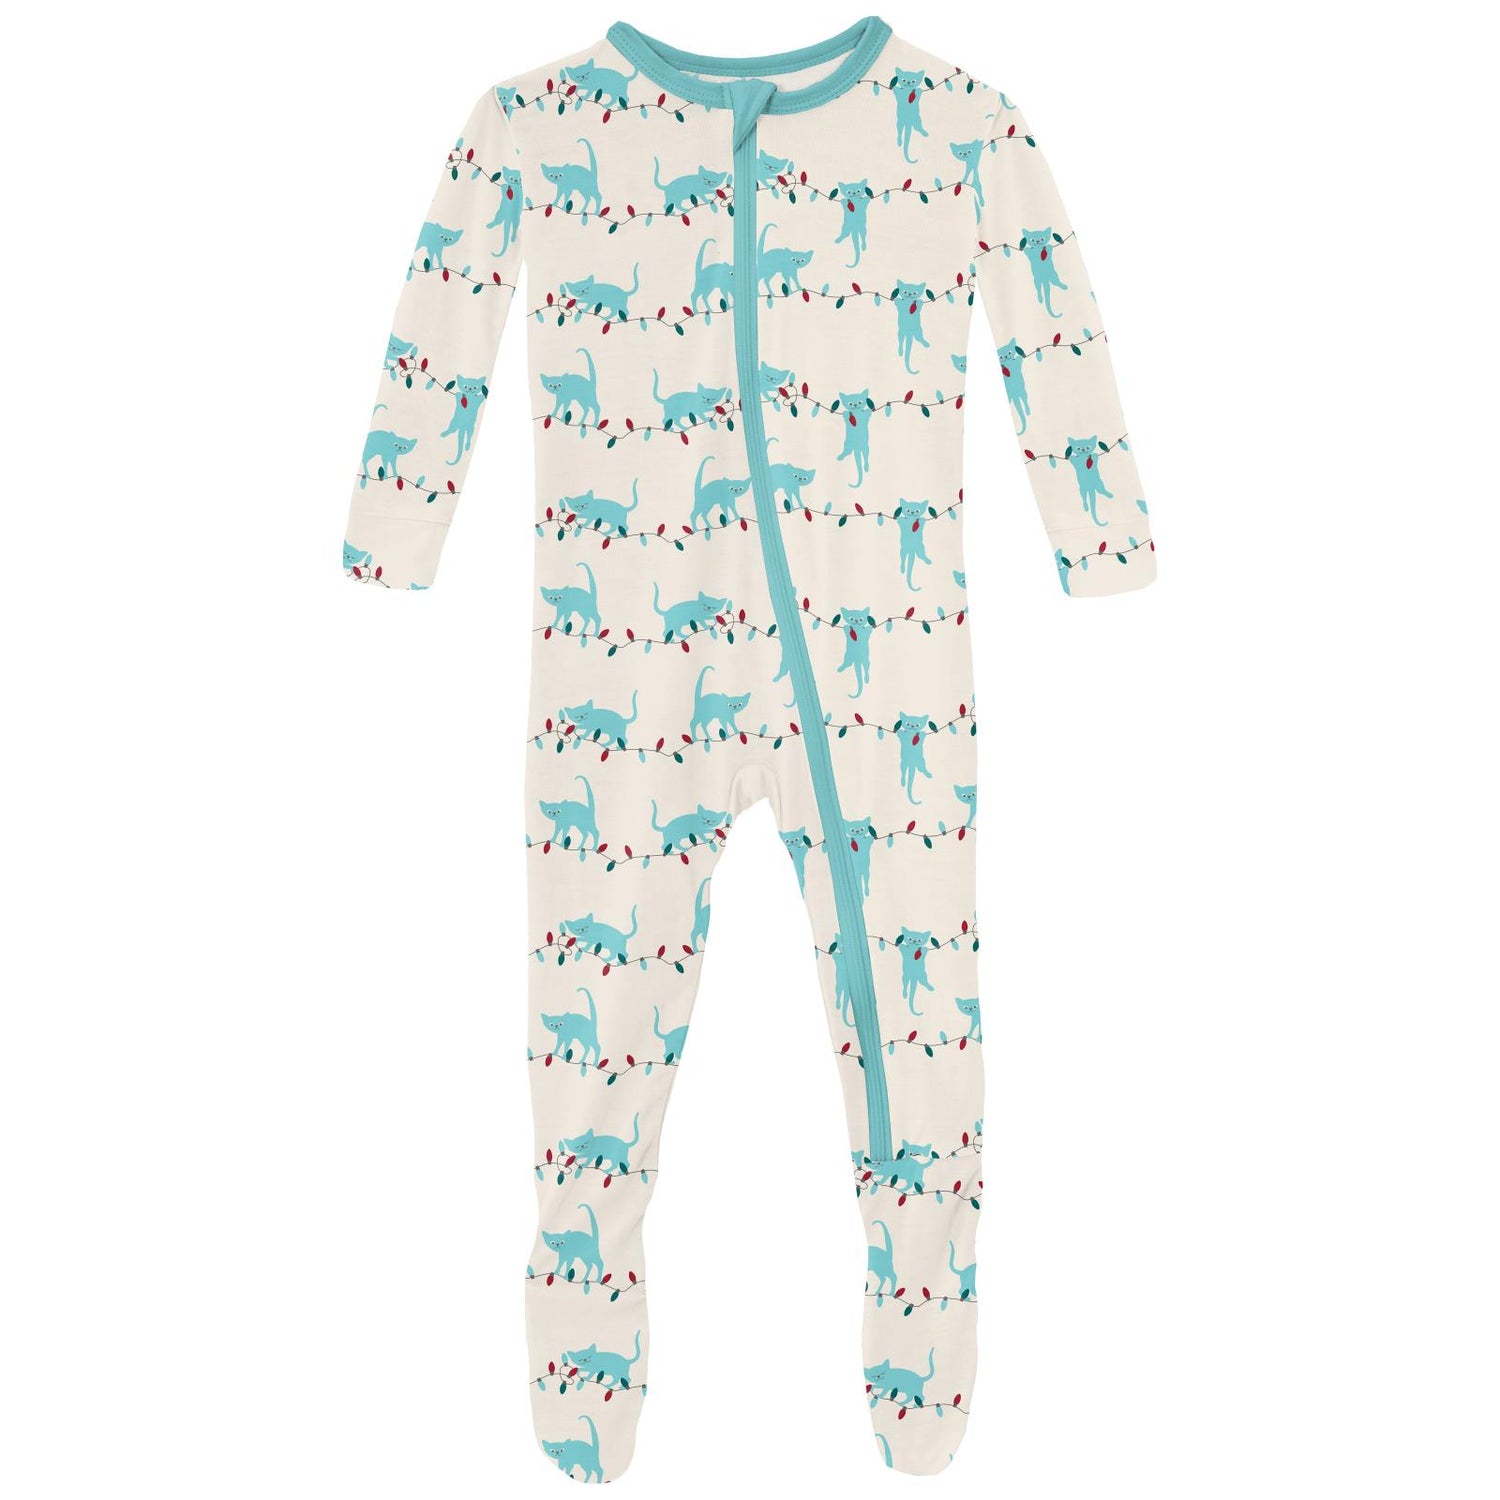 Print Footie with Zipper in Natural Tangled Kittens